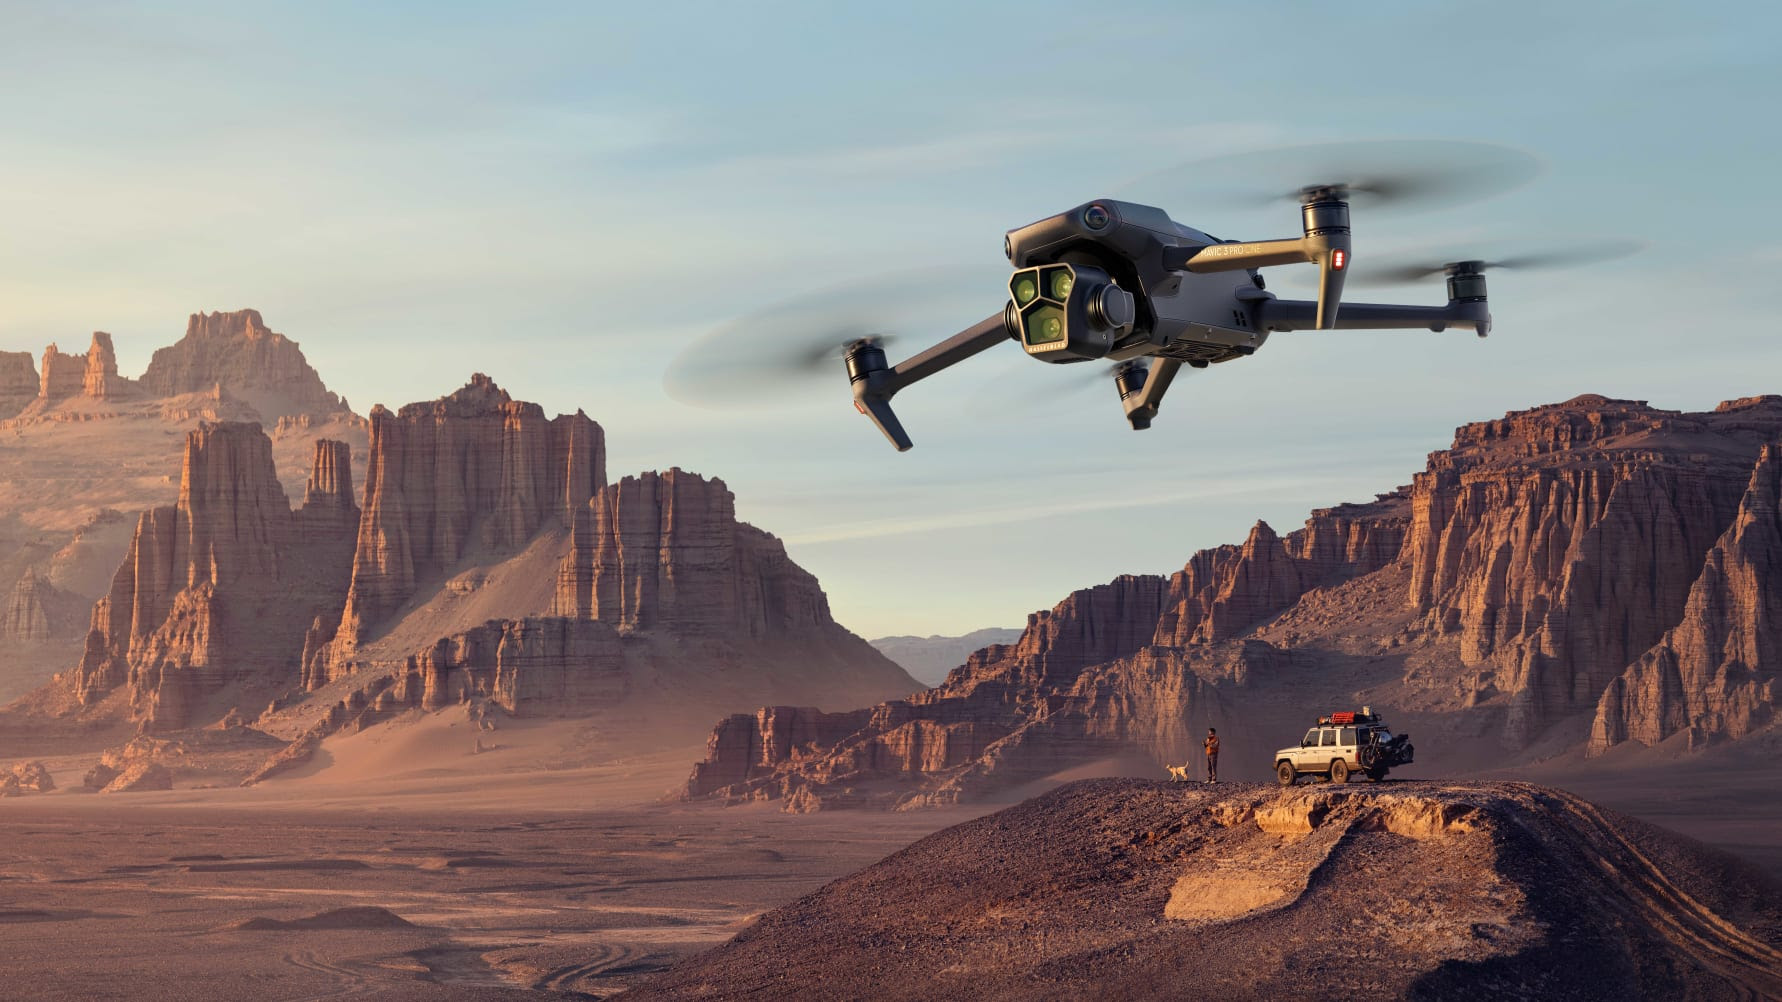 DJI Returns To IFA To Show First-In-Class Imaging Solutions For Everyone